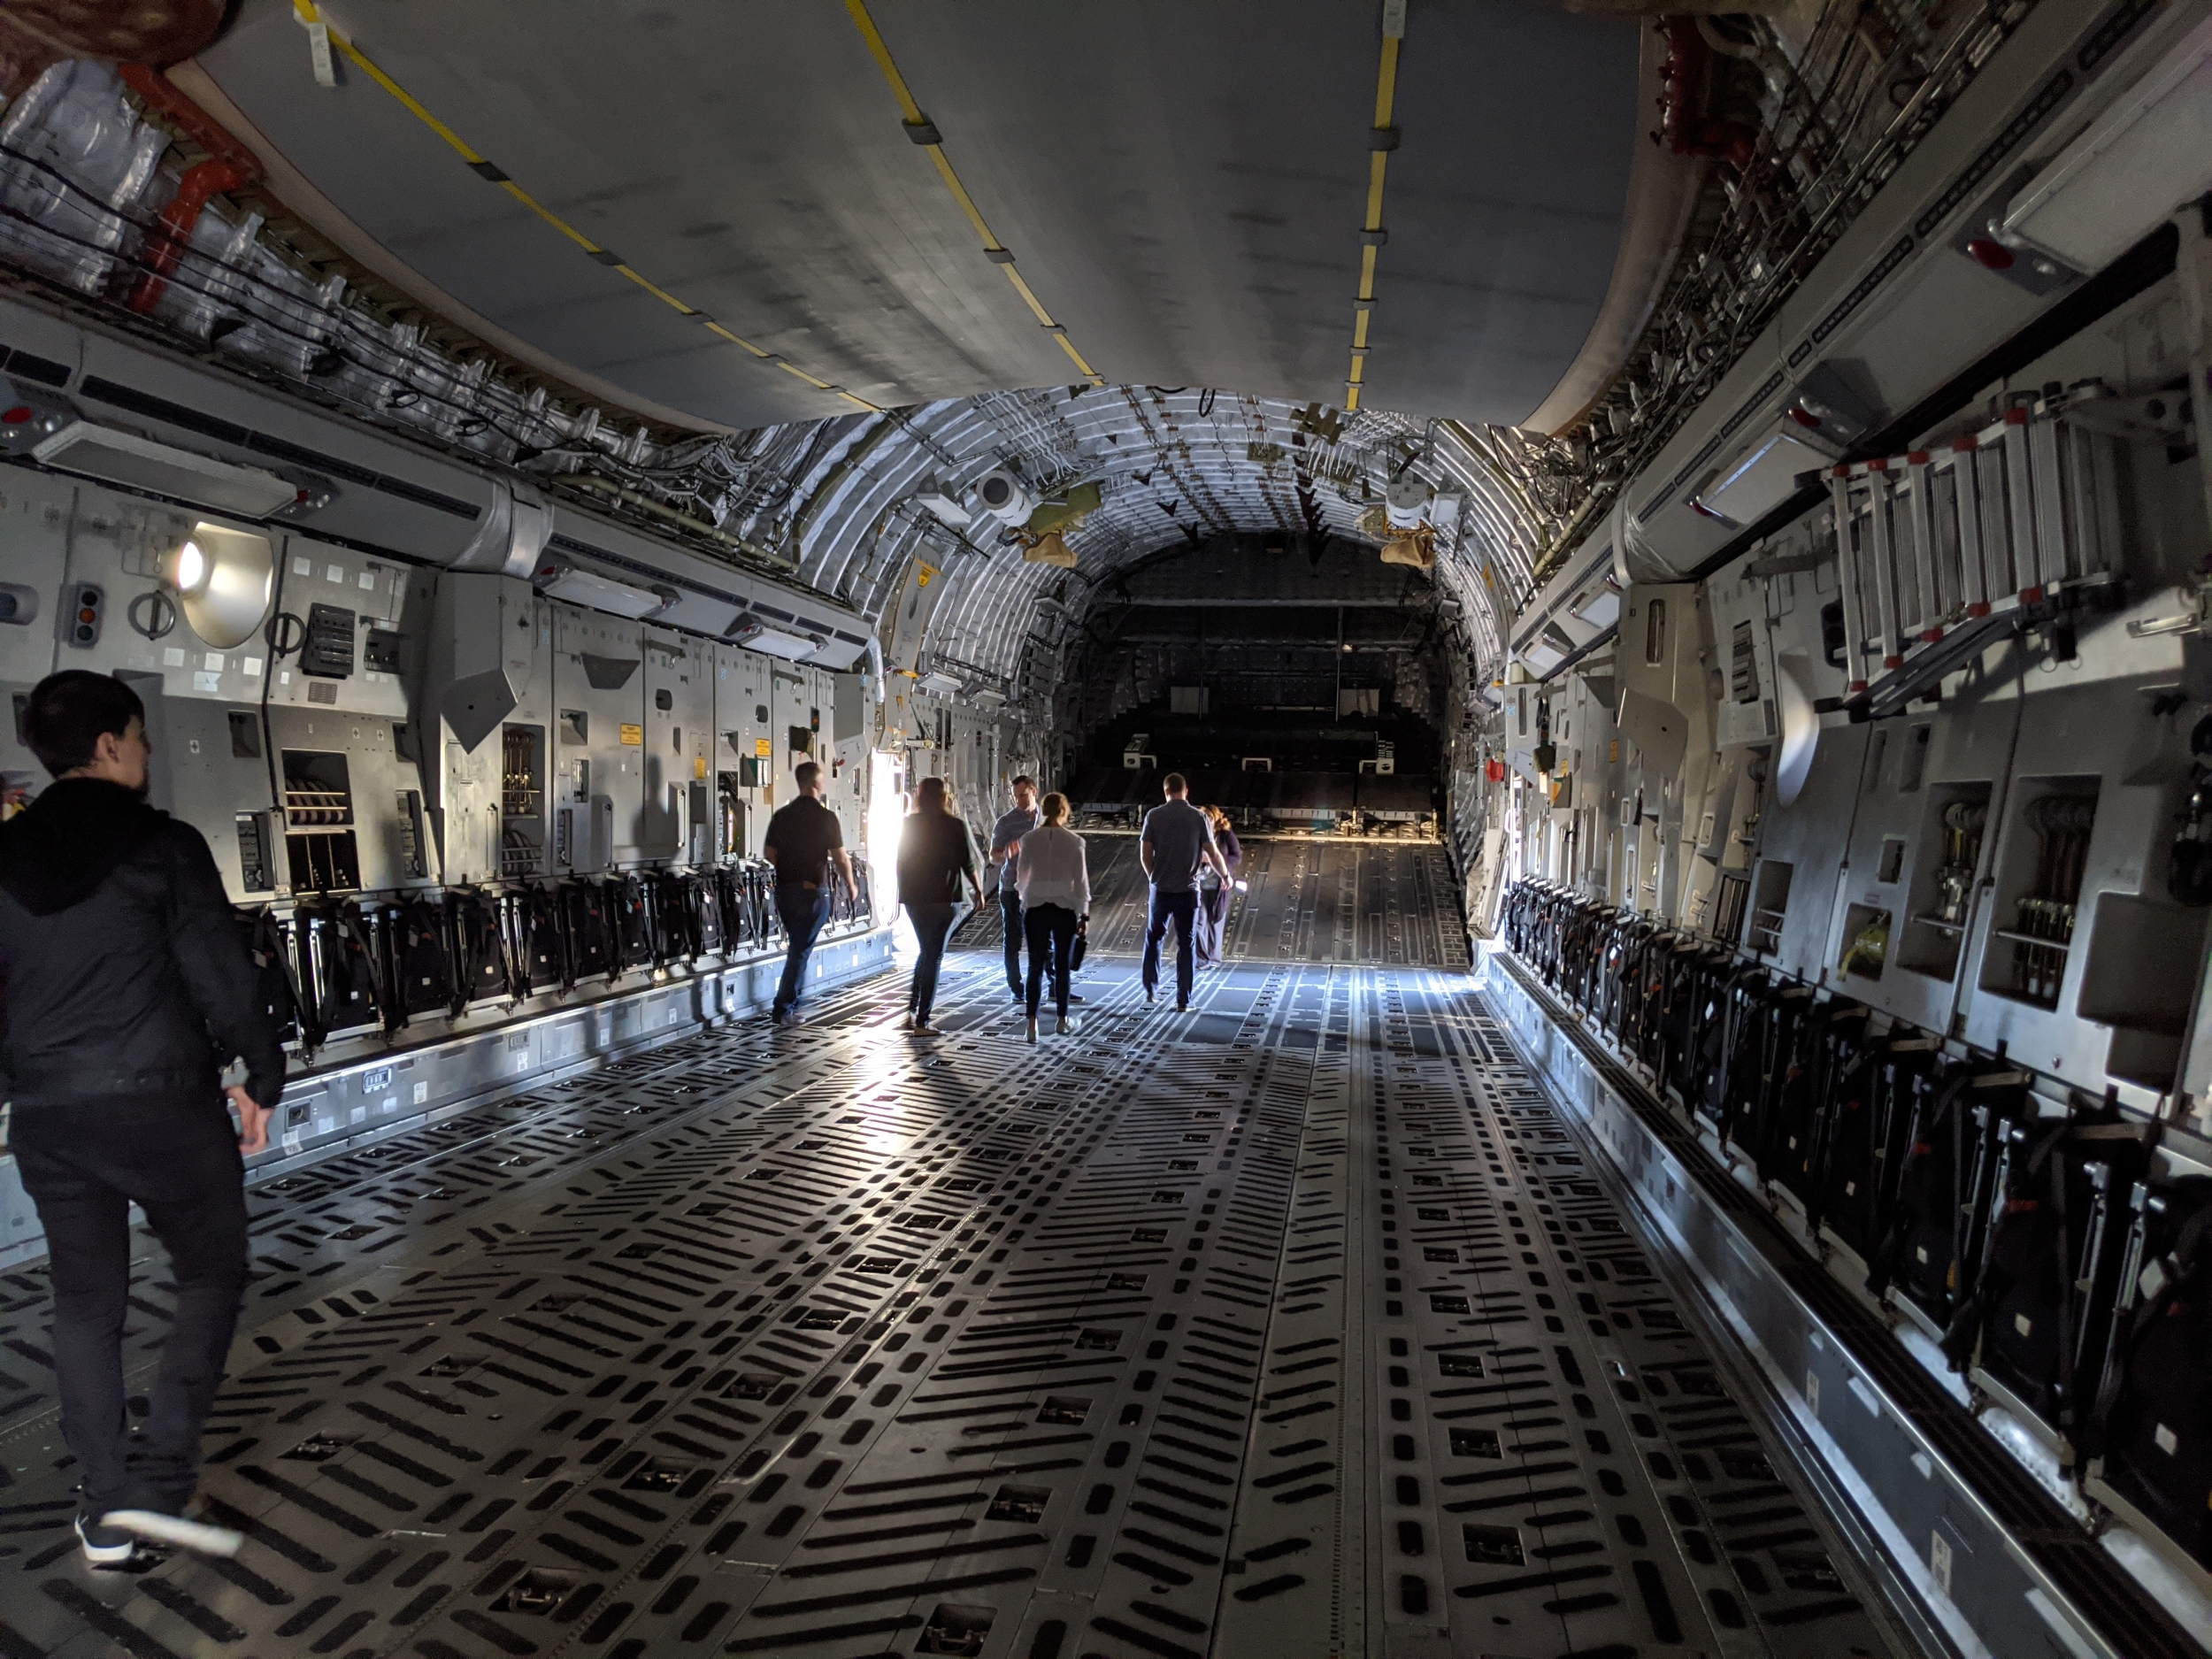 A photo of the inside of a C-17 aircraft.